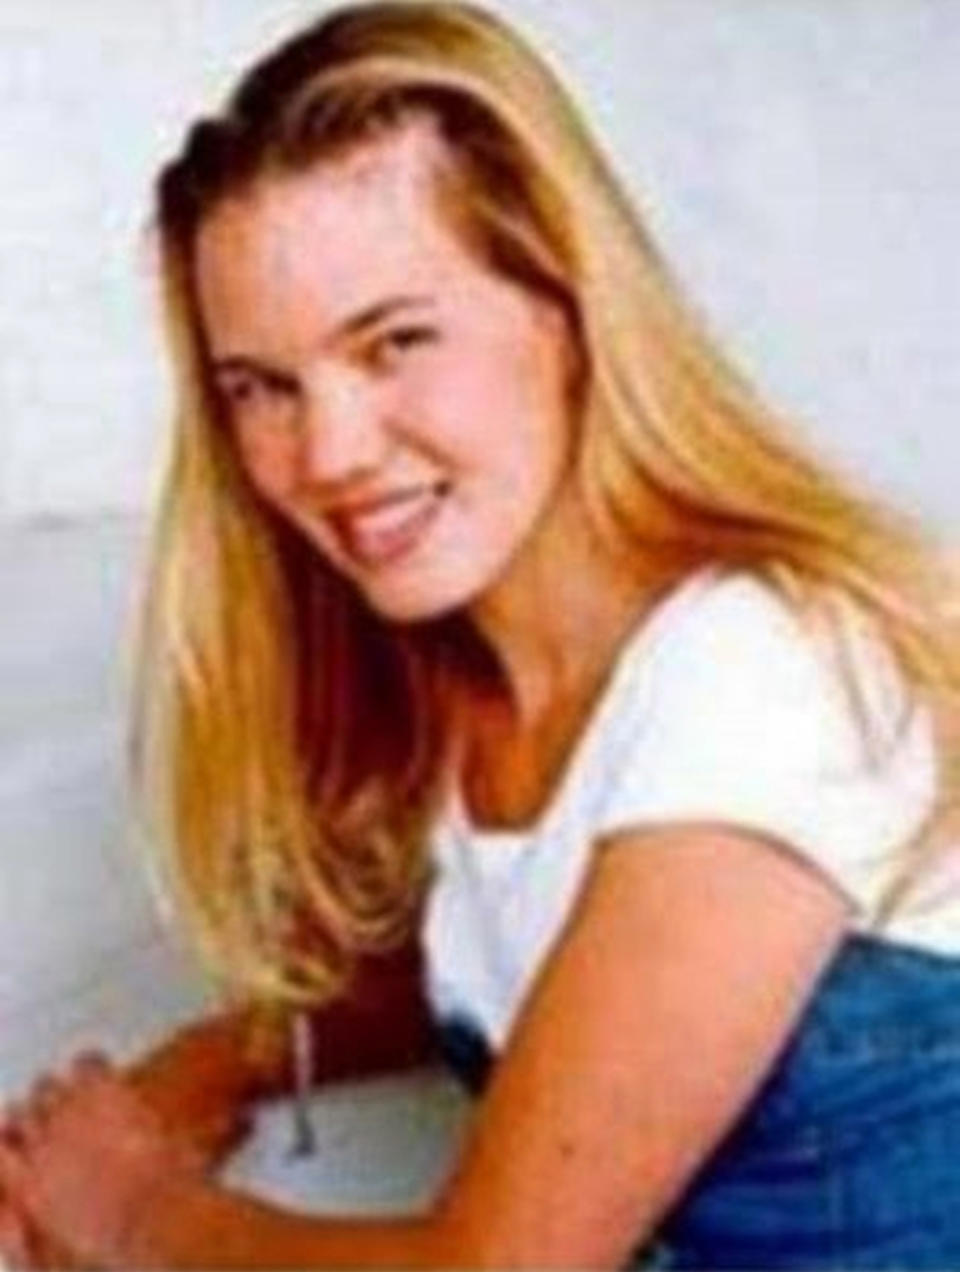 FILE - This undated photo released by the FBI shows Kristin Smart, the California Polytechnic State University, San Luis Obispo student who disappeared in 1996. The family of Smart who vanished nearly three decades ago has sued the school, alleging it caused Smart's murder through negligence. The suit filed Thursday, Jan. 18, 2024, contends that California Polytechnic State University in San Luis Obispo could have prevented Smart's death if it had properly dealt with previous allegations that another student, Paul Flores, had stalked and harassed women there. (FBI via AP, File)